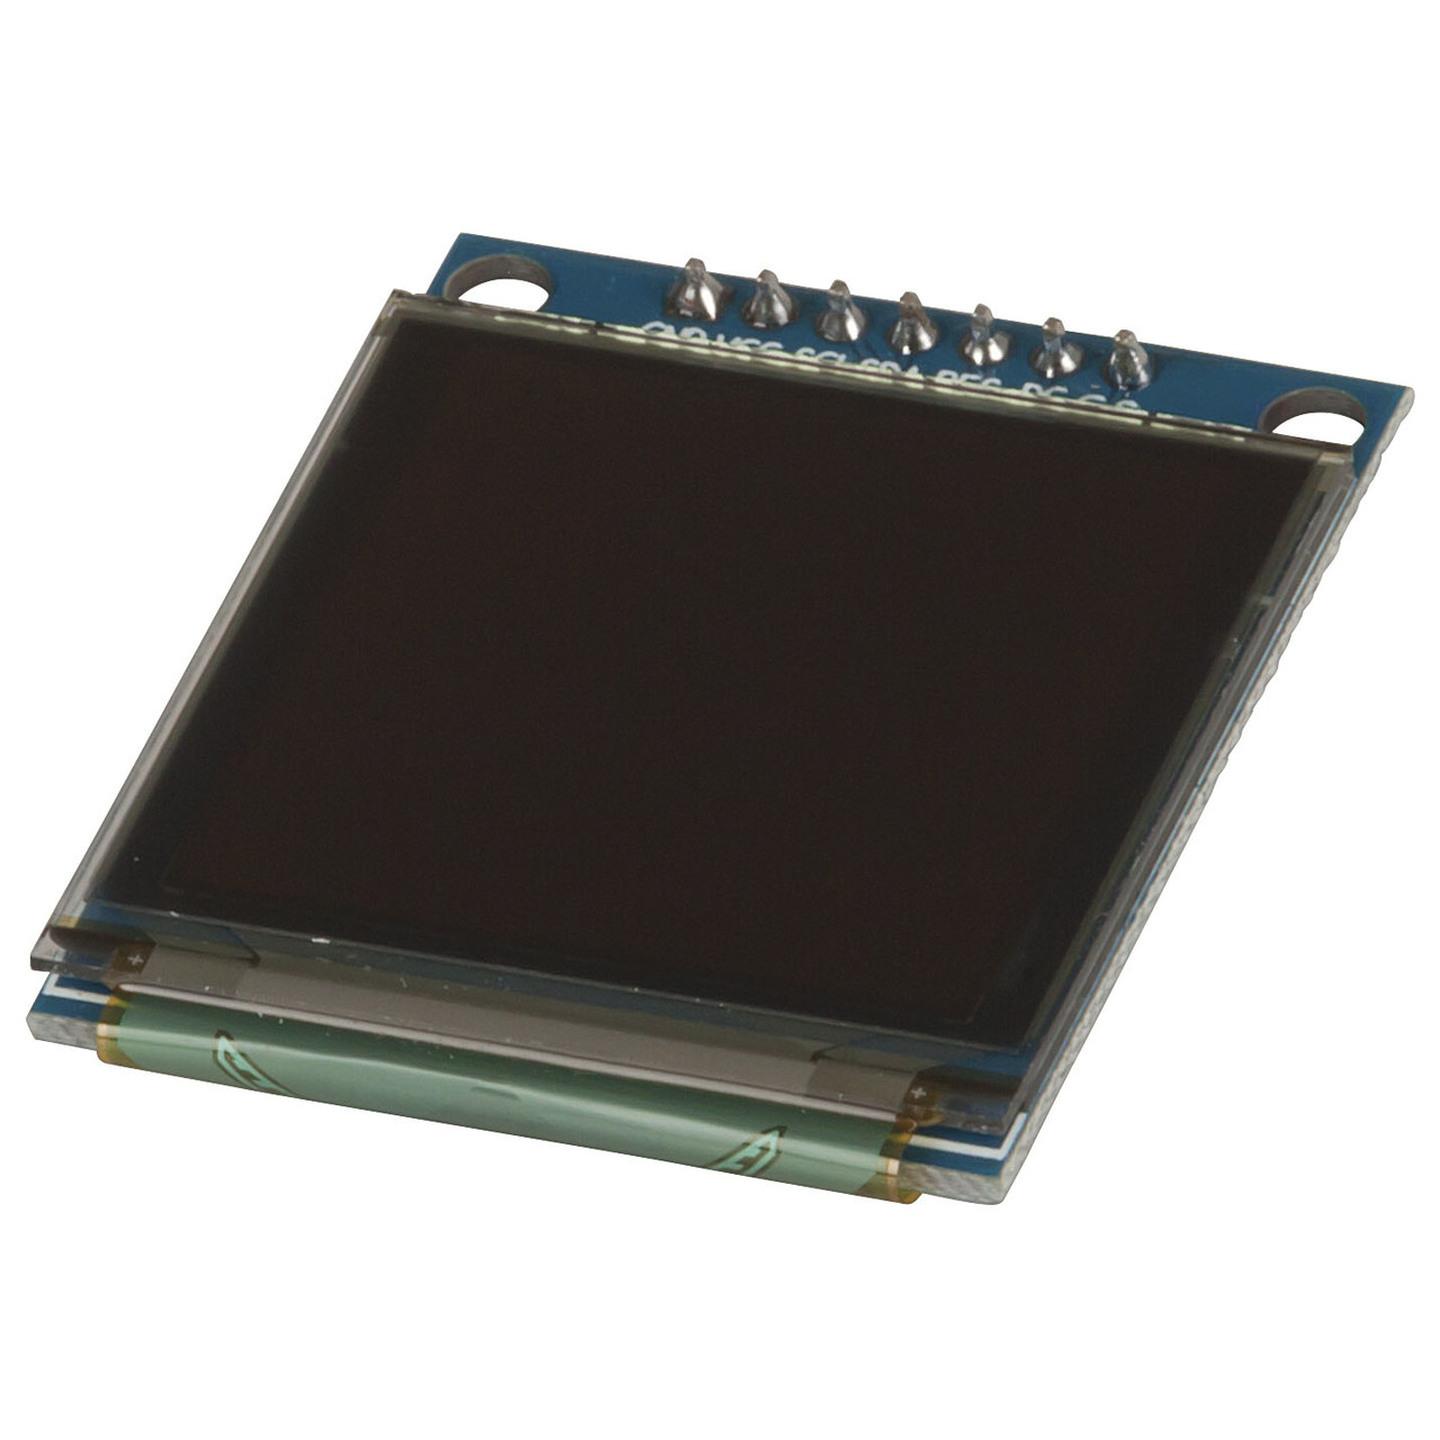 Duinotech Arduino Compatible 1.5 Inch Colour OLED Display